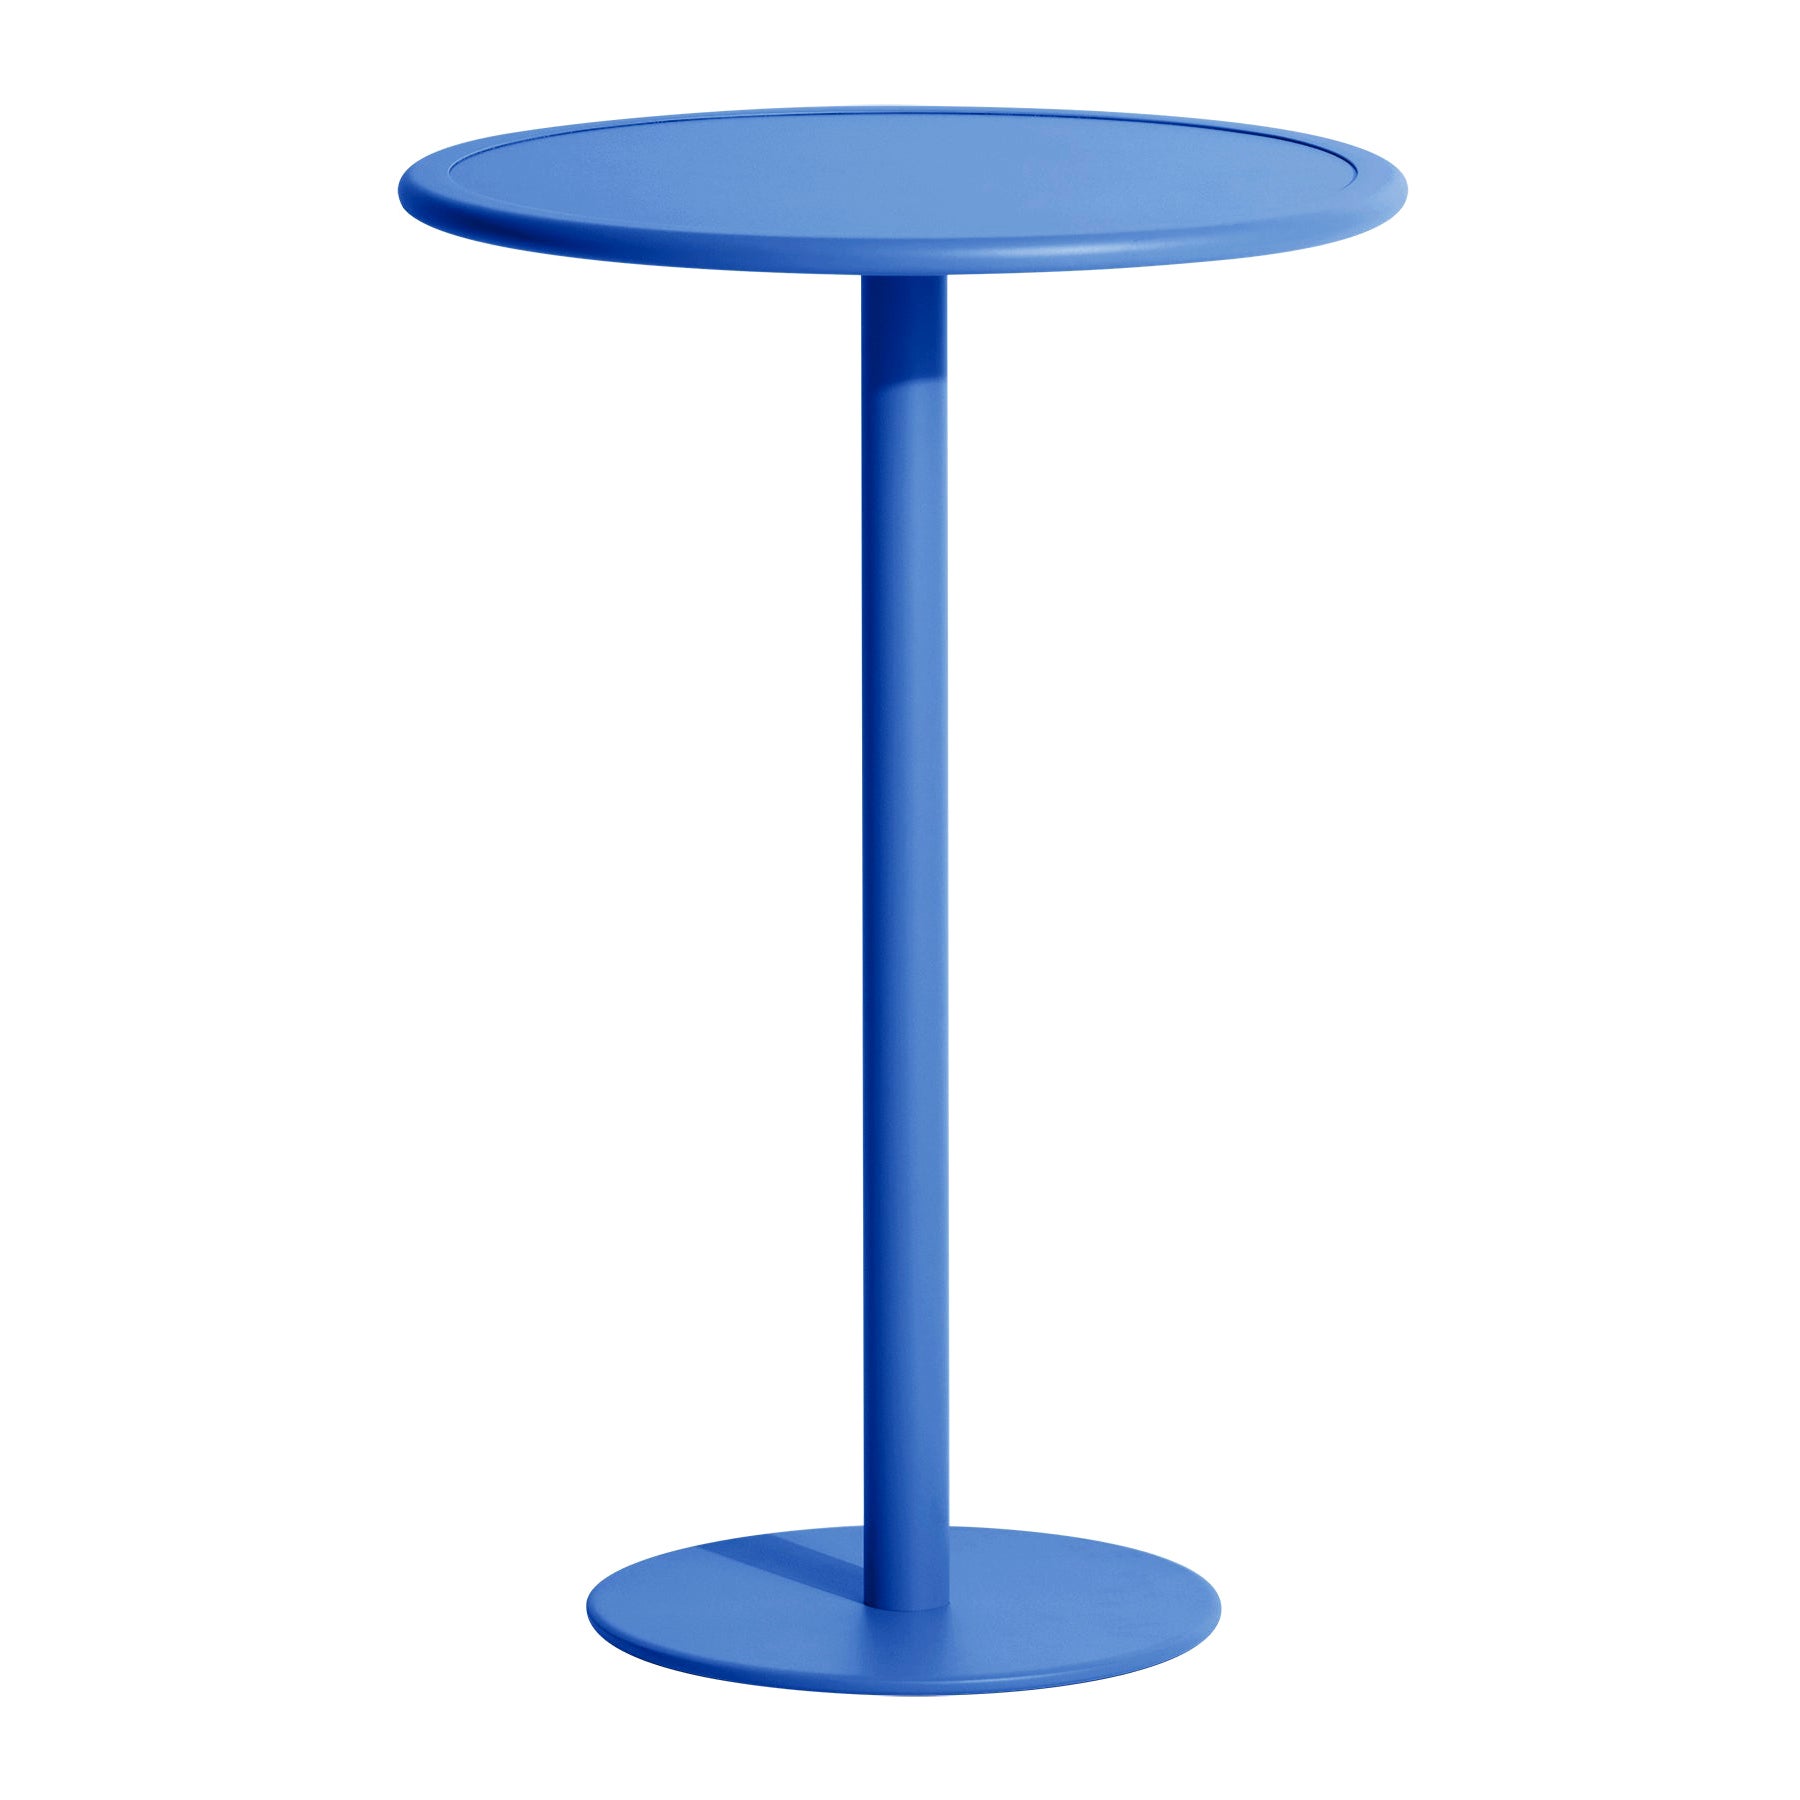 Petite Friture Week-End Round High Table in Blue Aluminium, 2017 For Sale